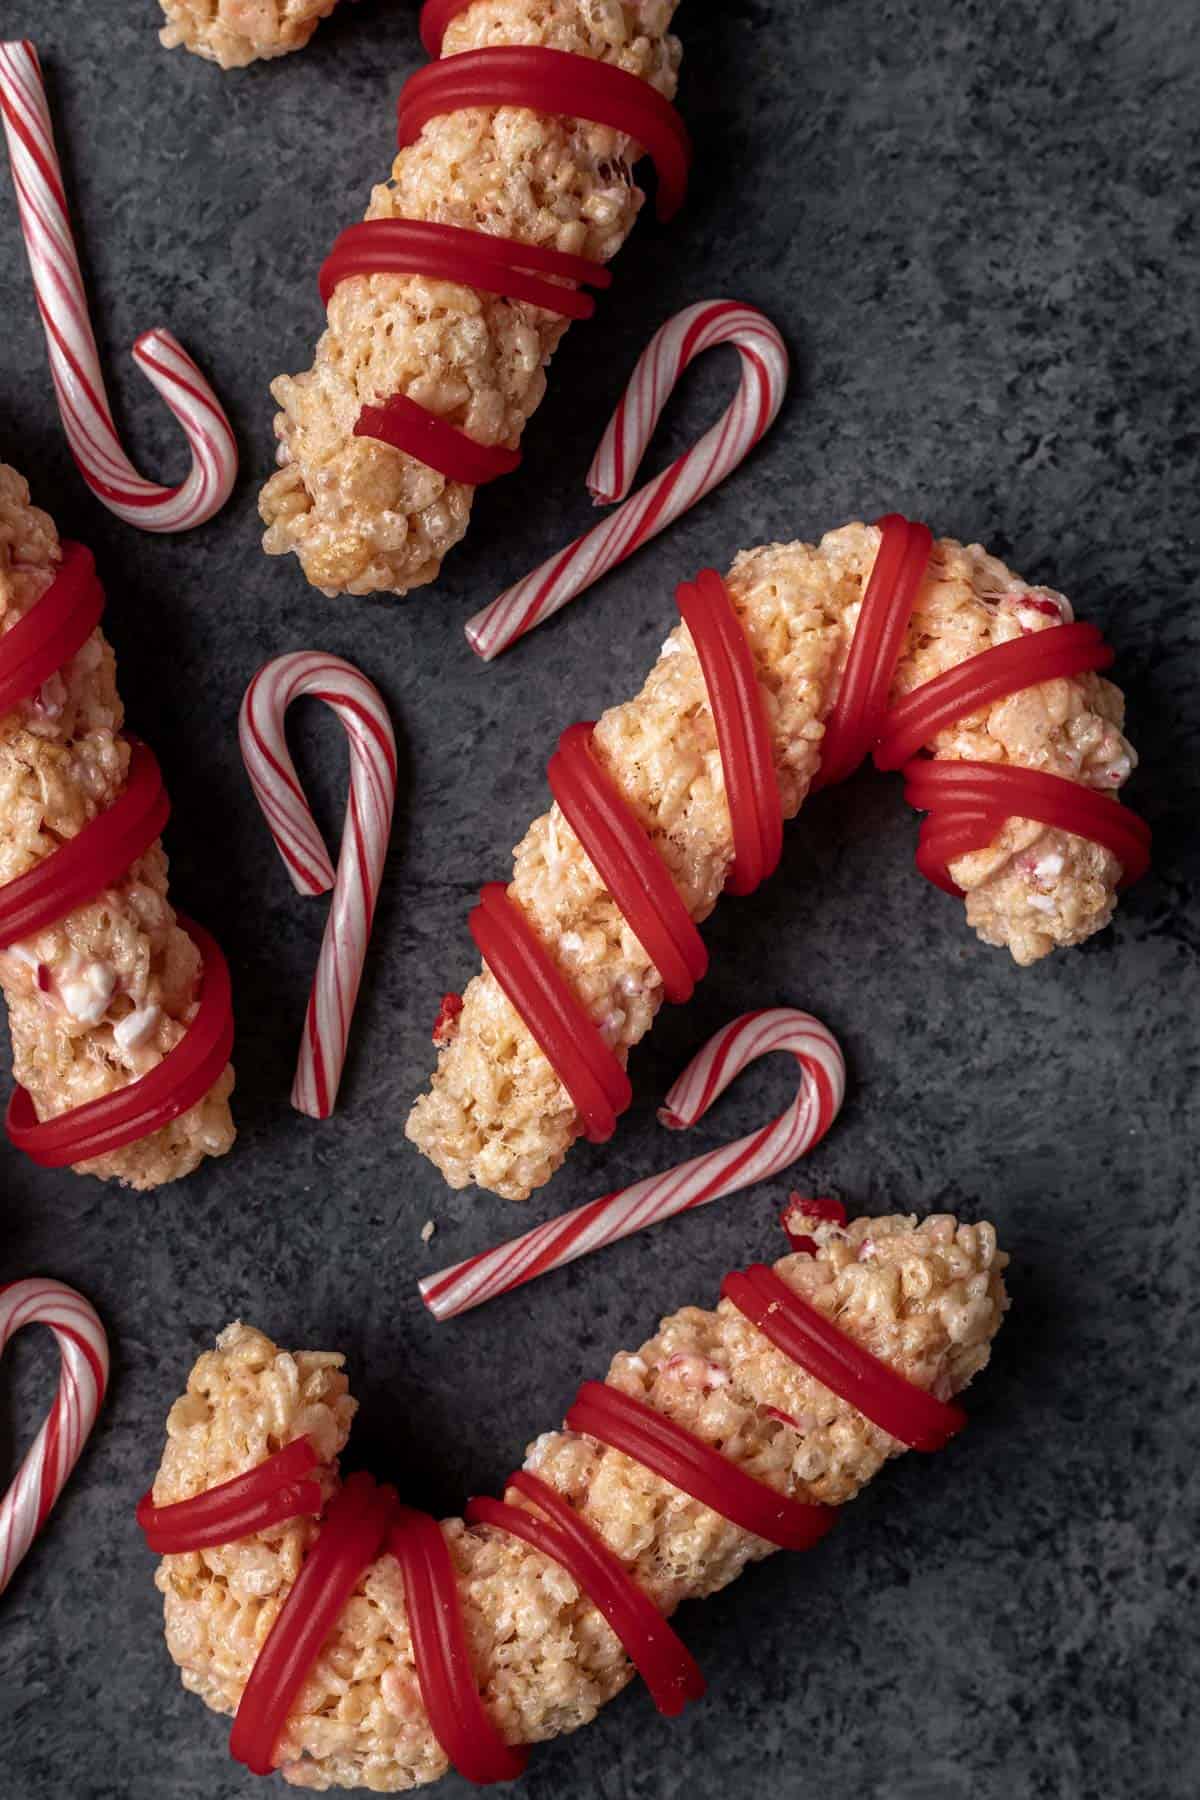 Peppermint candy cane rice krispie treats arranged on a dark gray backdrop with small candy canes around them.